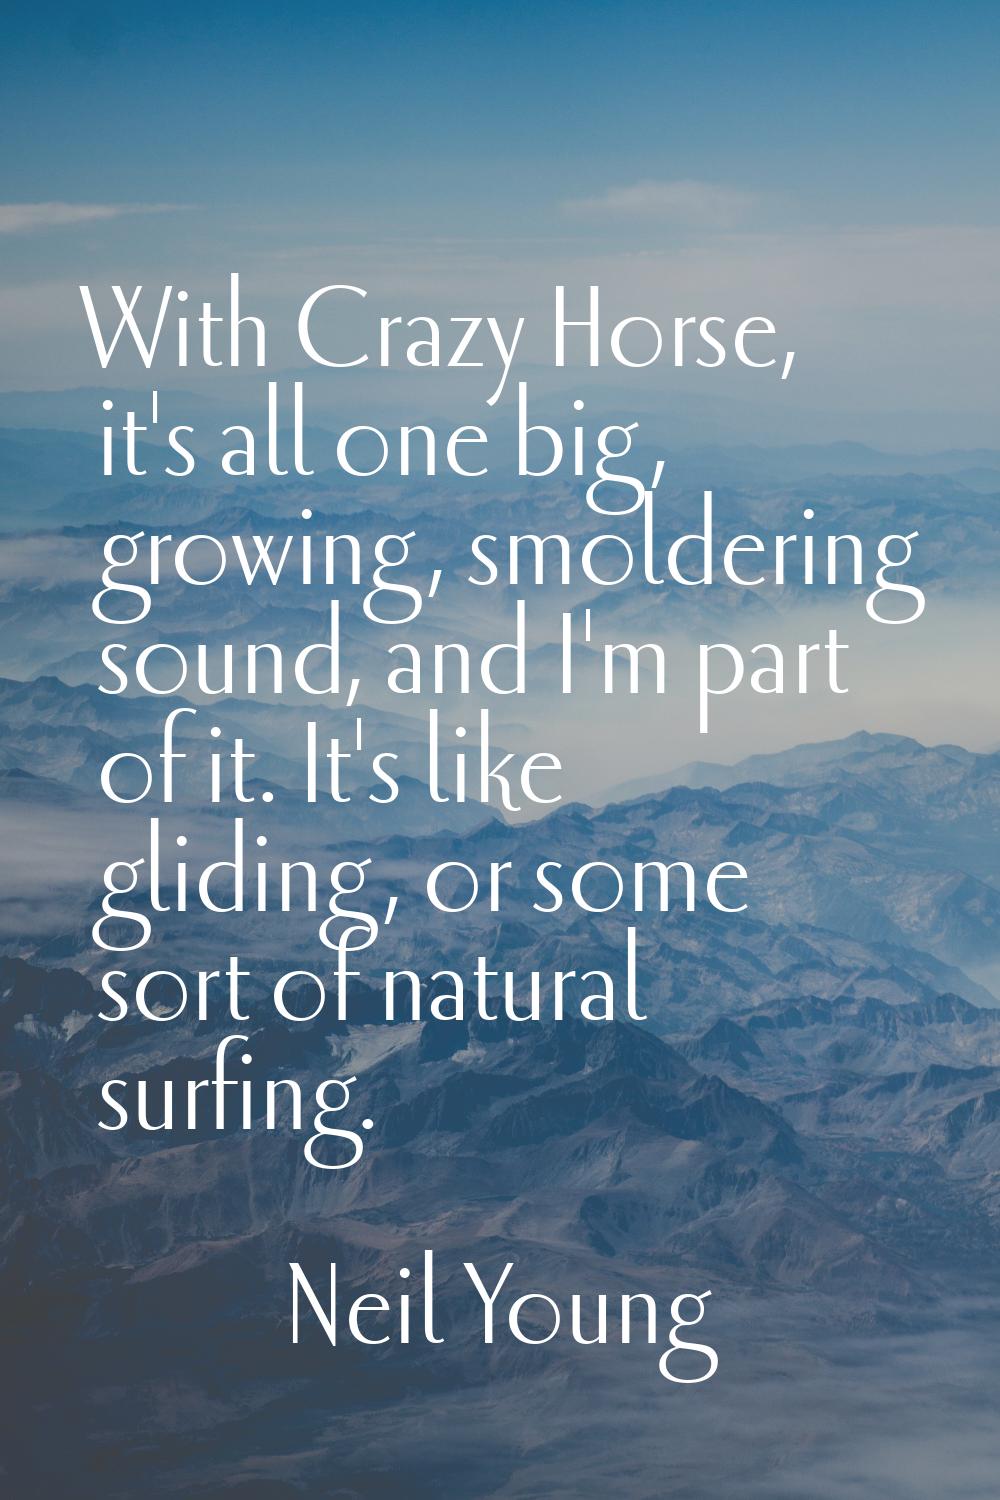 With Crazy Horse, it's all one big, growing, smoldering sound, and I'm part of it. It's like glidin